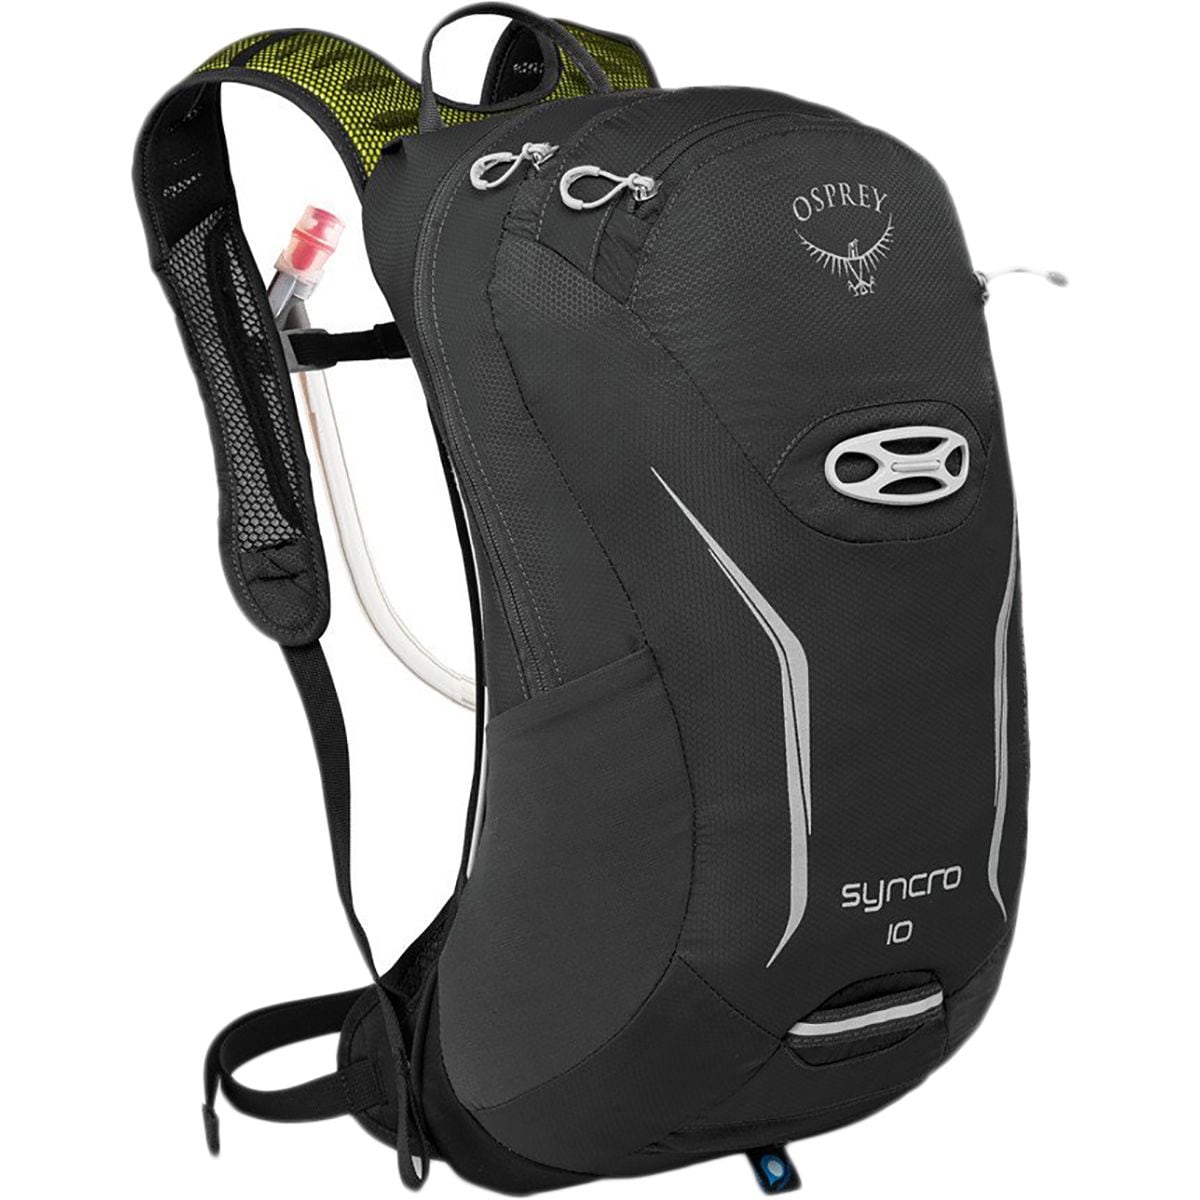 Osprey Packs Syncro 10 Hydration Backpack 488 610cu in